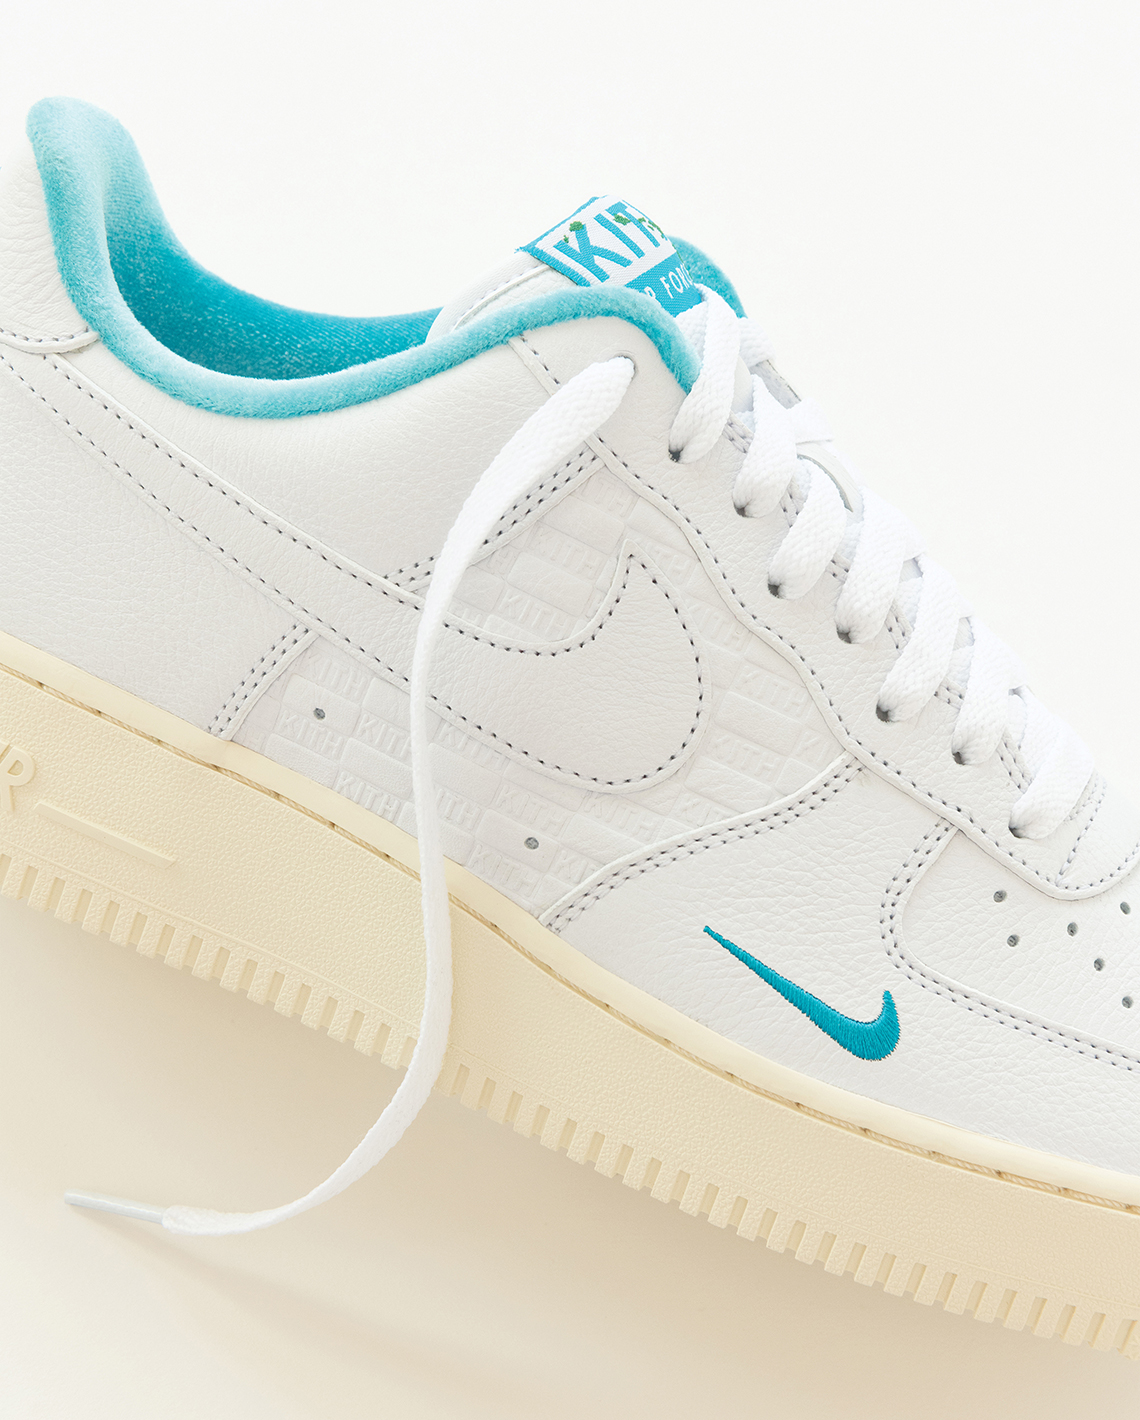 Kith Air Force 1 Hawaii Release Date 5